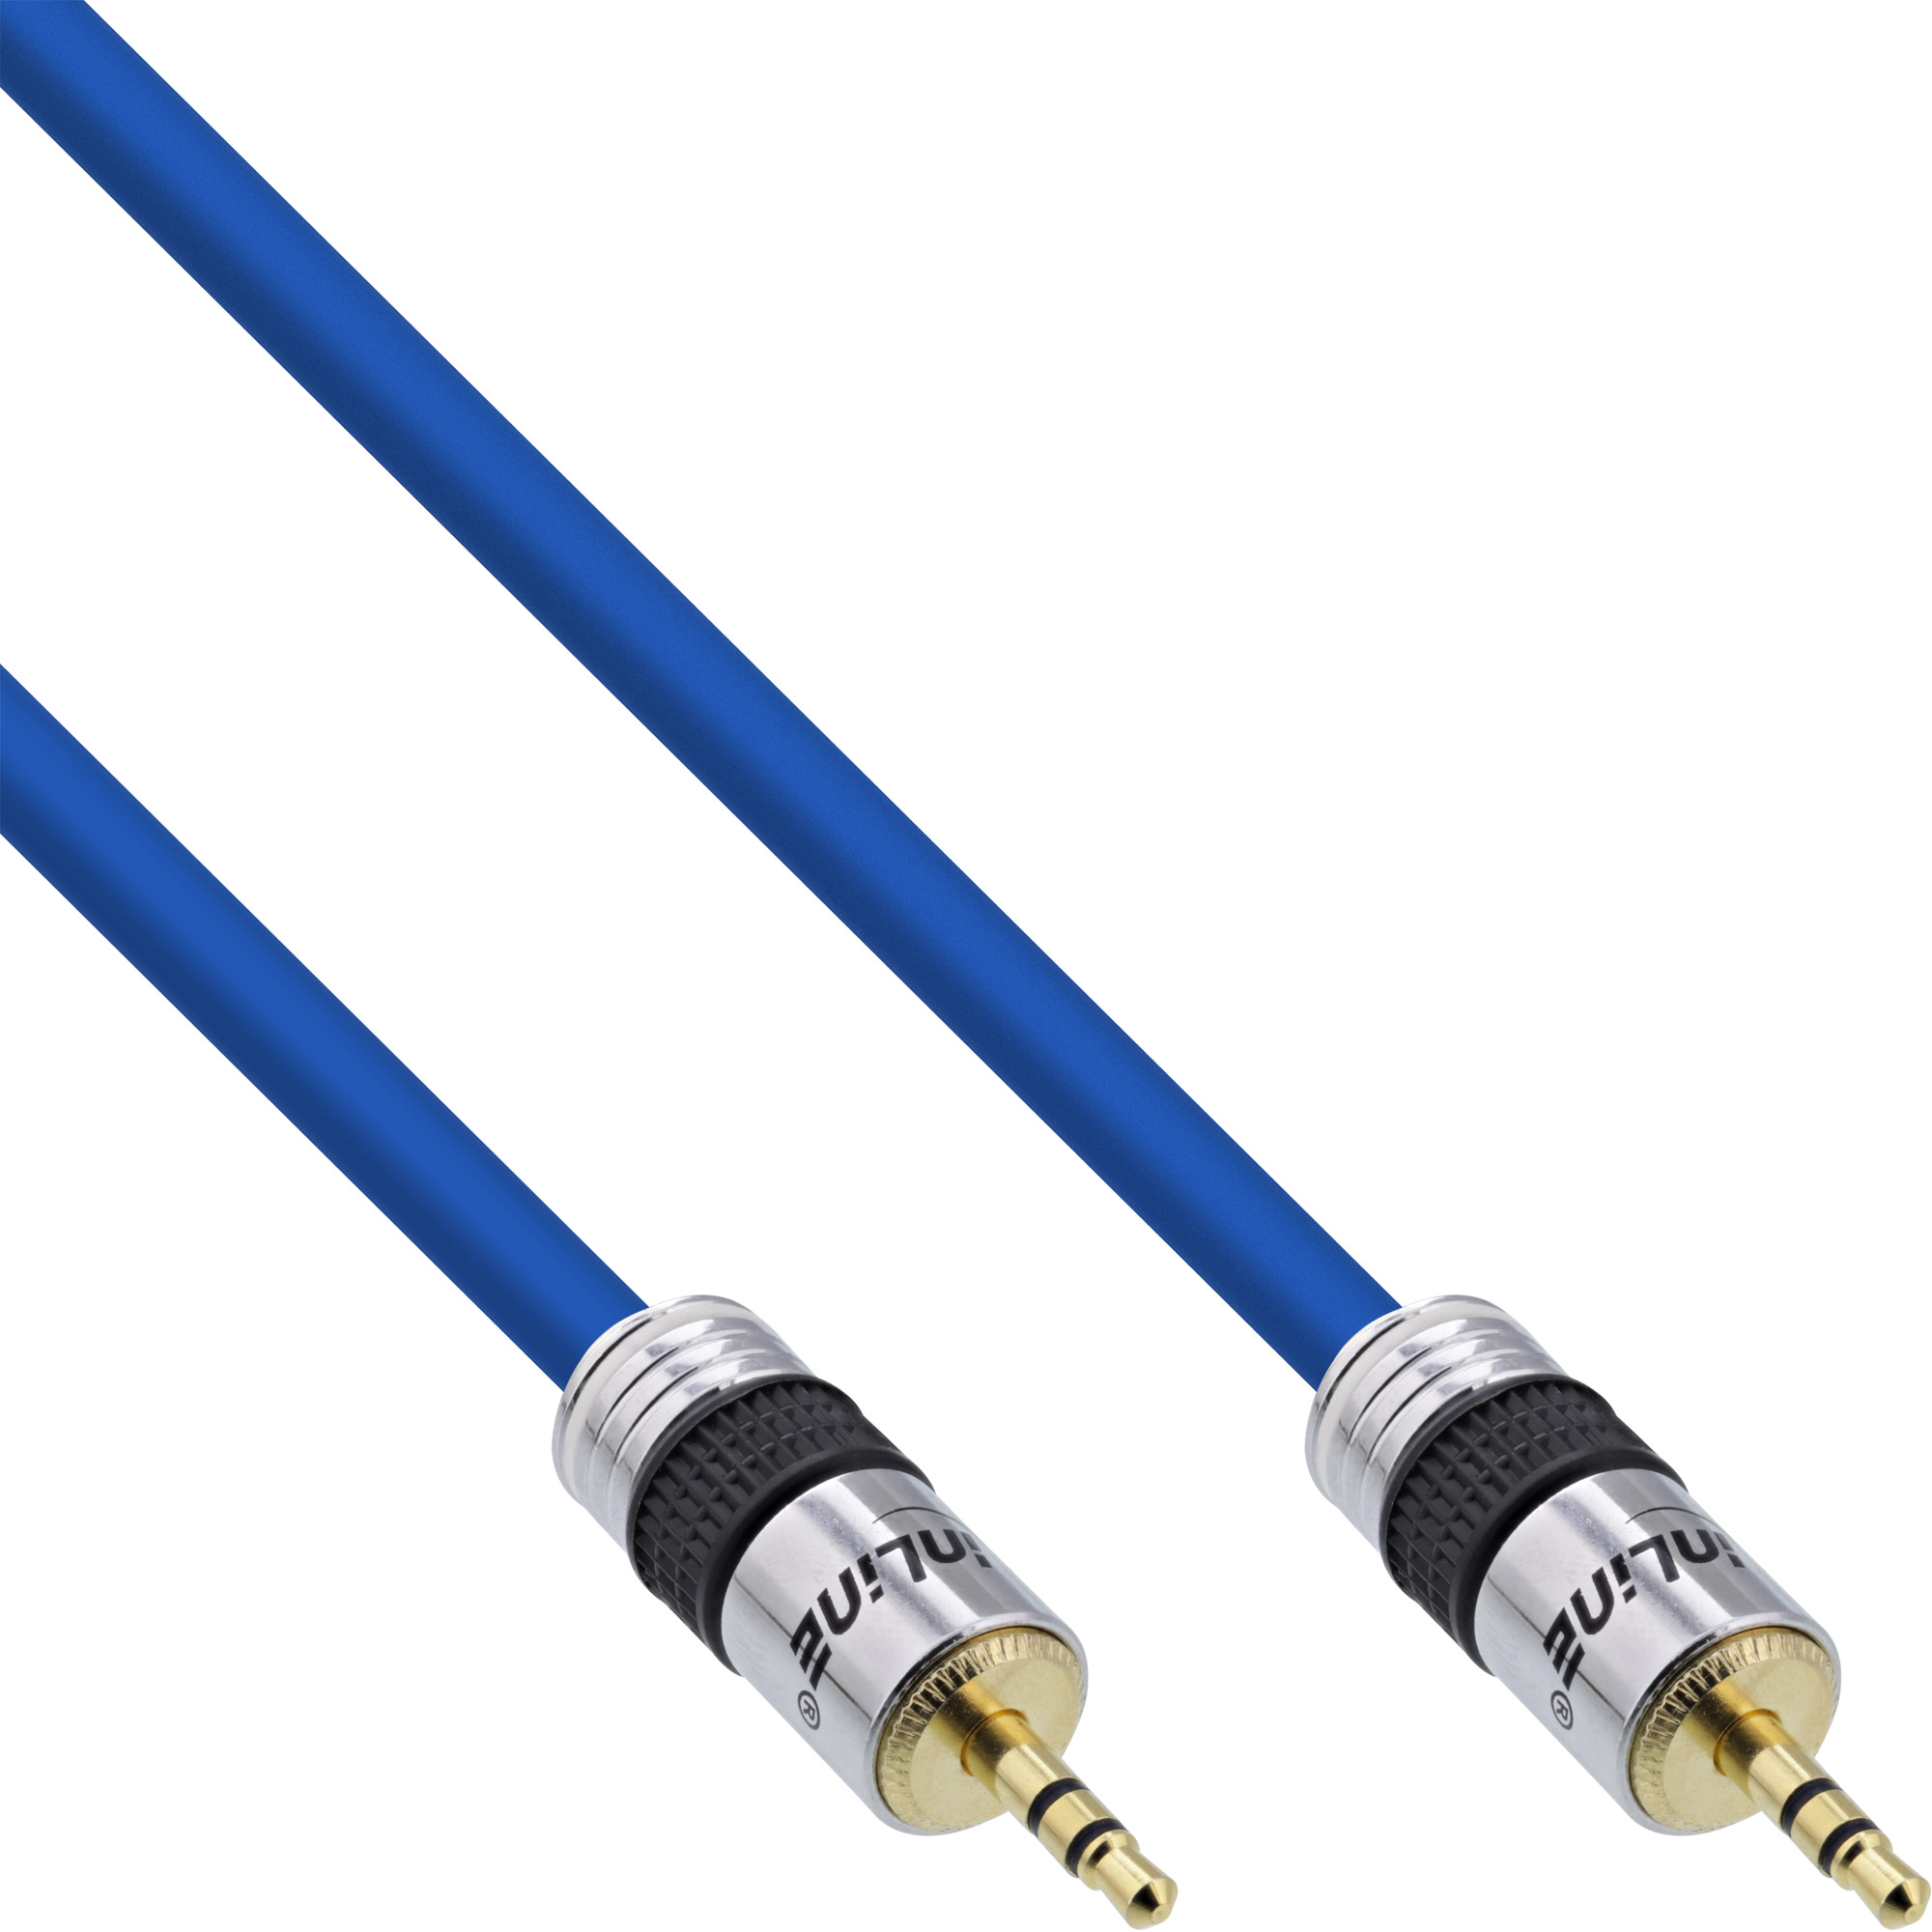 Stereo jack Pro 3.5 mm, 5 m